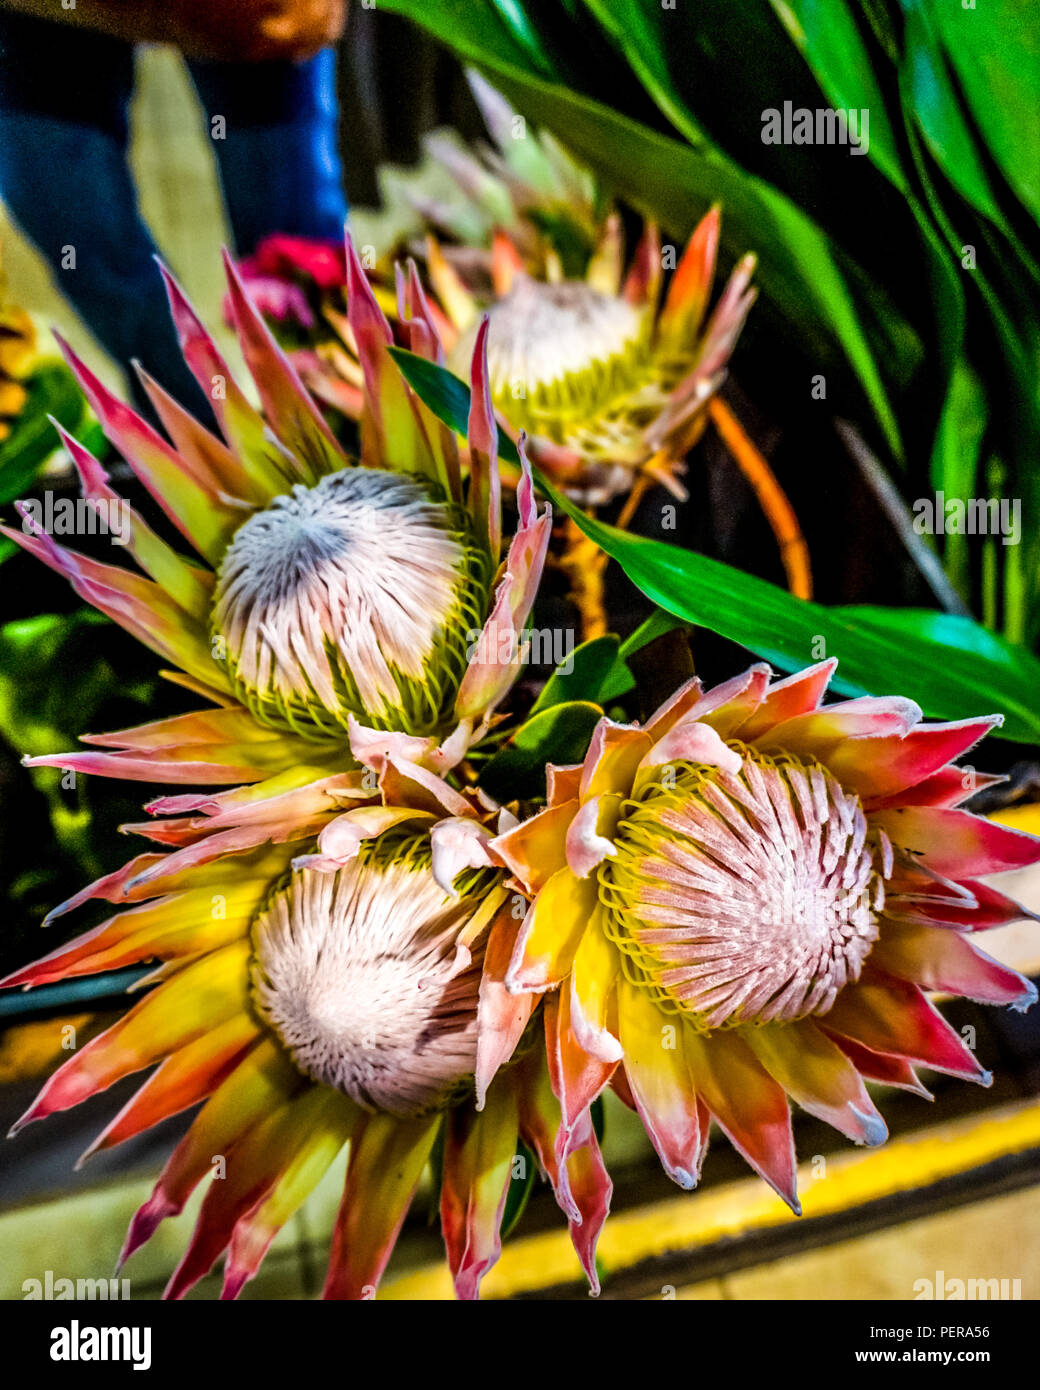 The beautiful flowering King Protea, or sugar bush, which is indigenous to the Cape Floristic Region of South Africa. Stock Photo